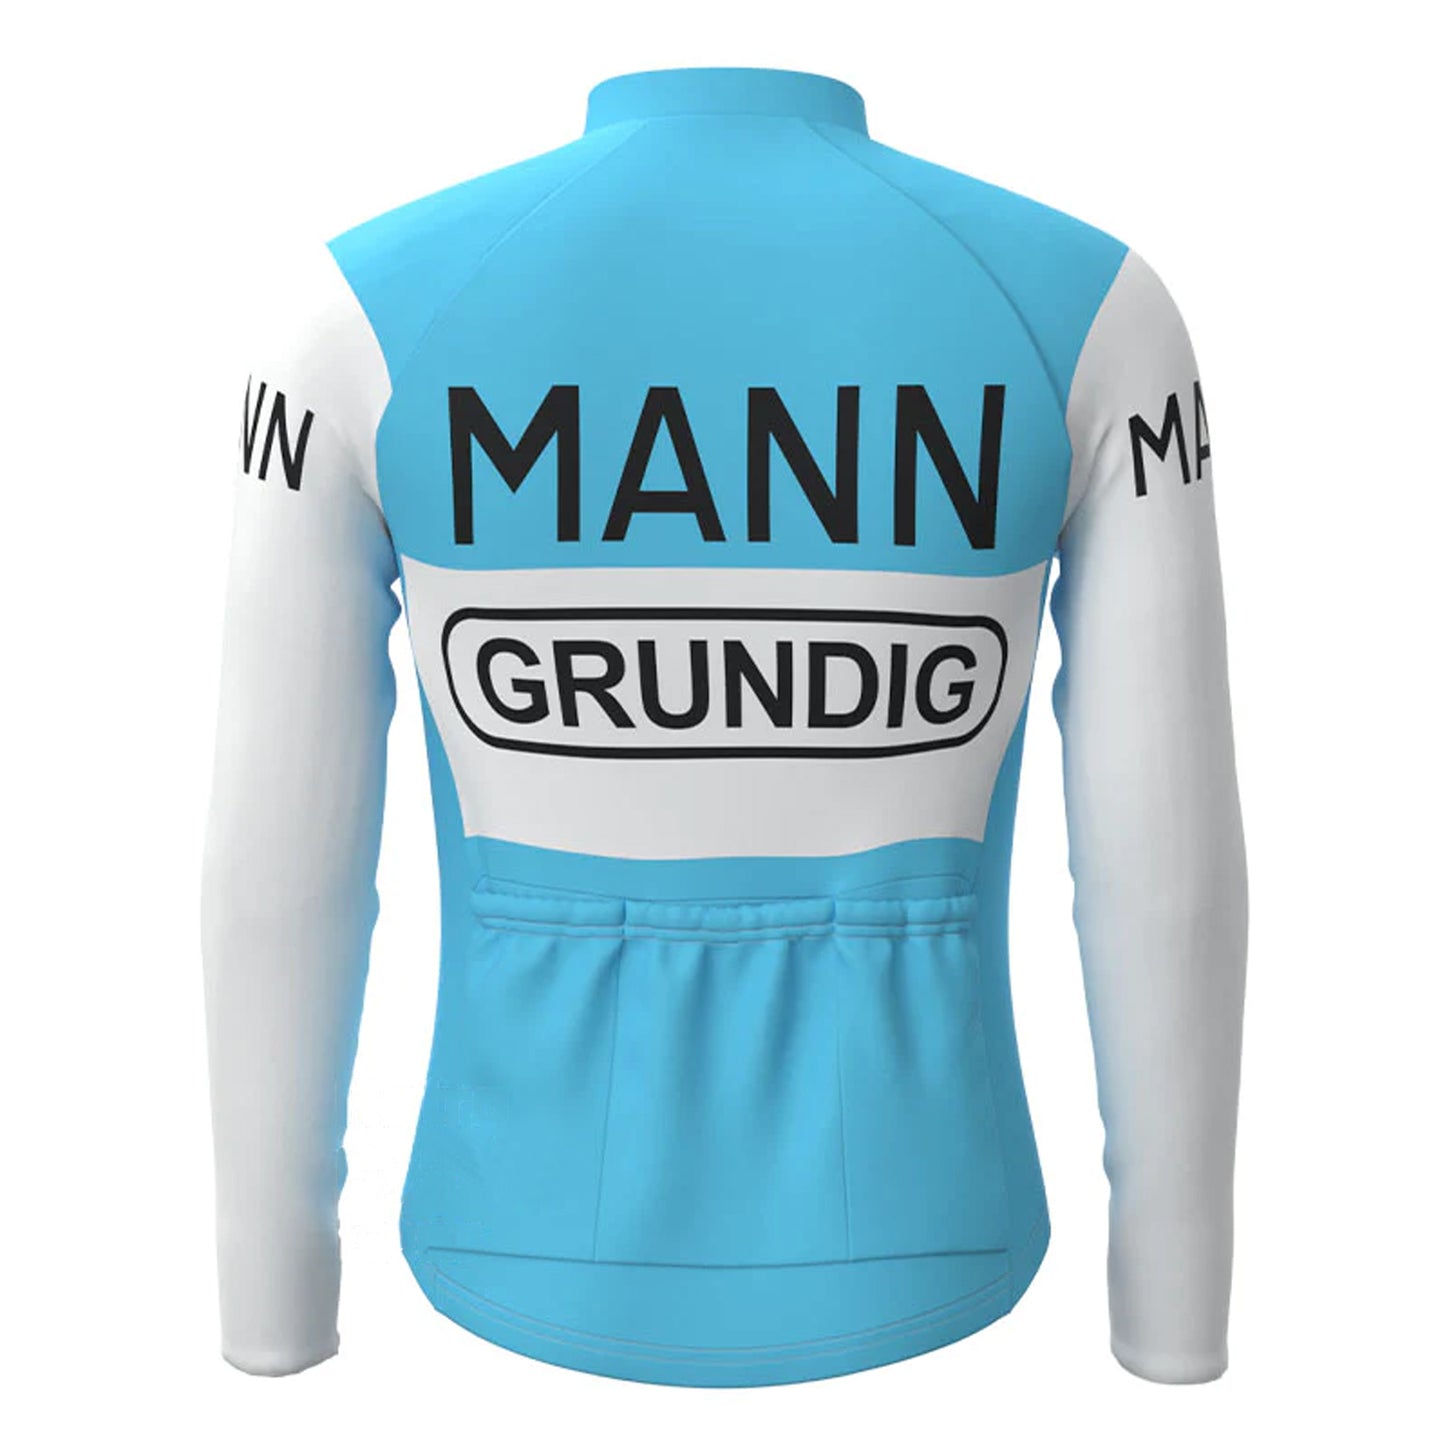 Dr. Mann Blue Vintage Long Sleeve Cycling Jersey Top